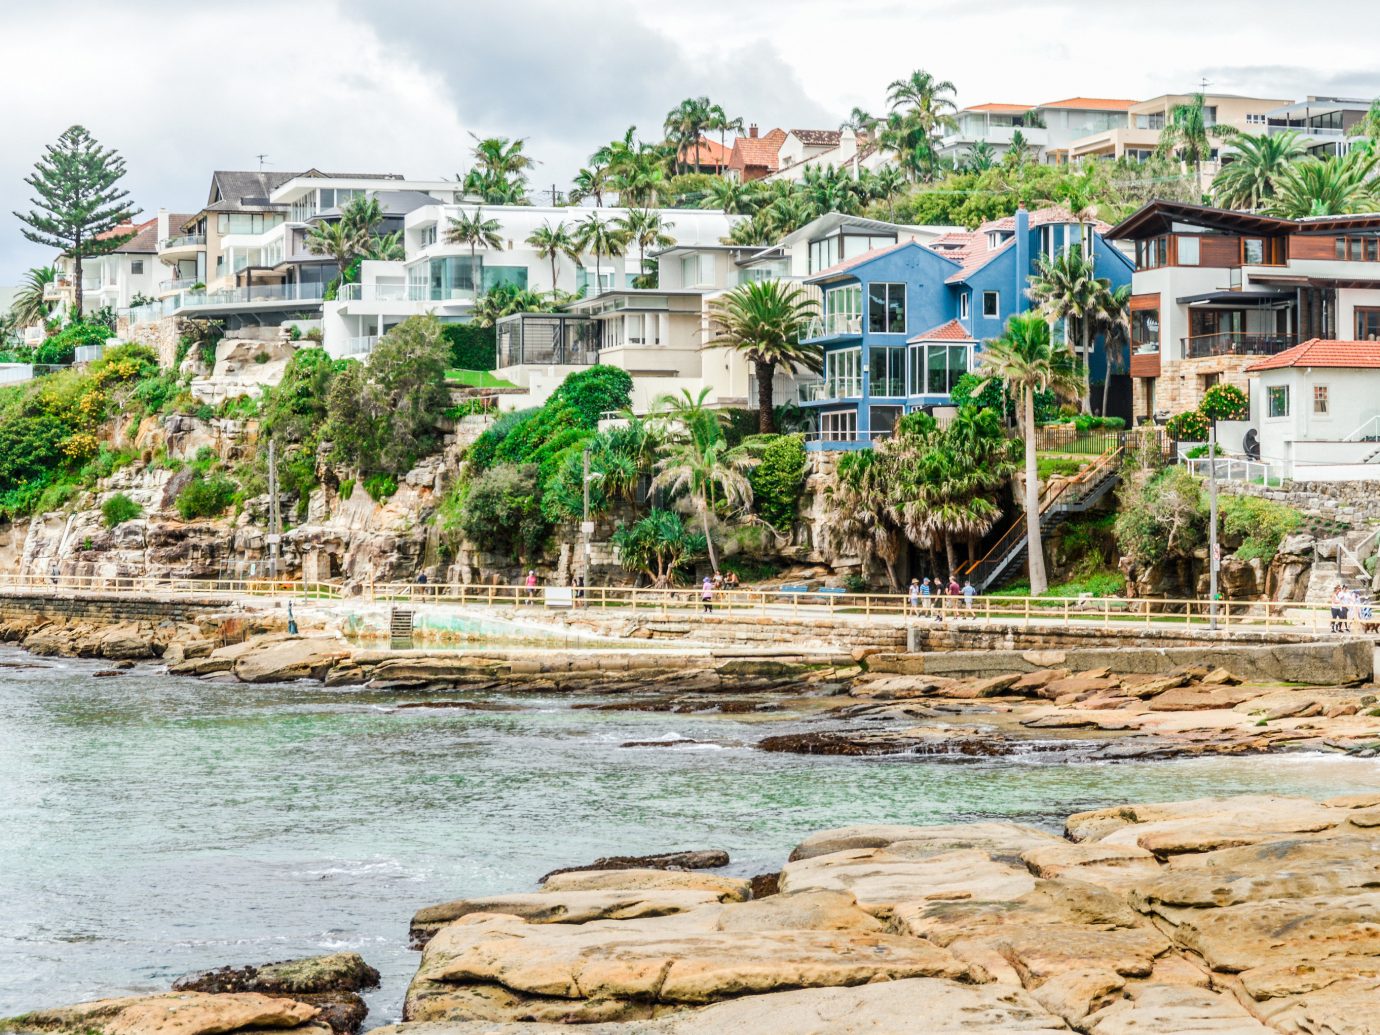 City Outdoors + Adventure Sydney outdoor building sky water body of water house Coast shore Sea tree tourism Village bay docked